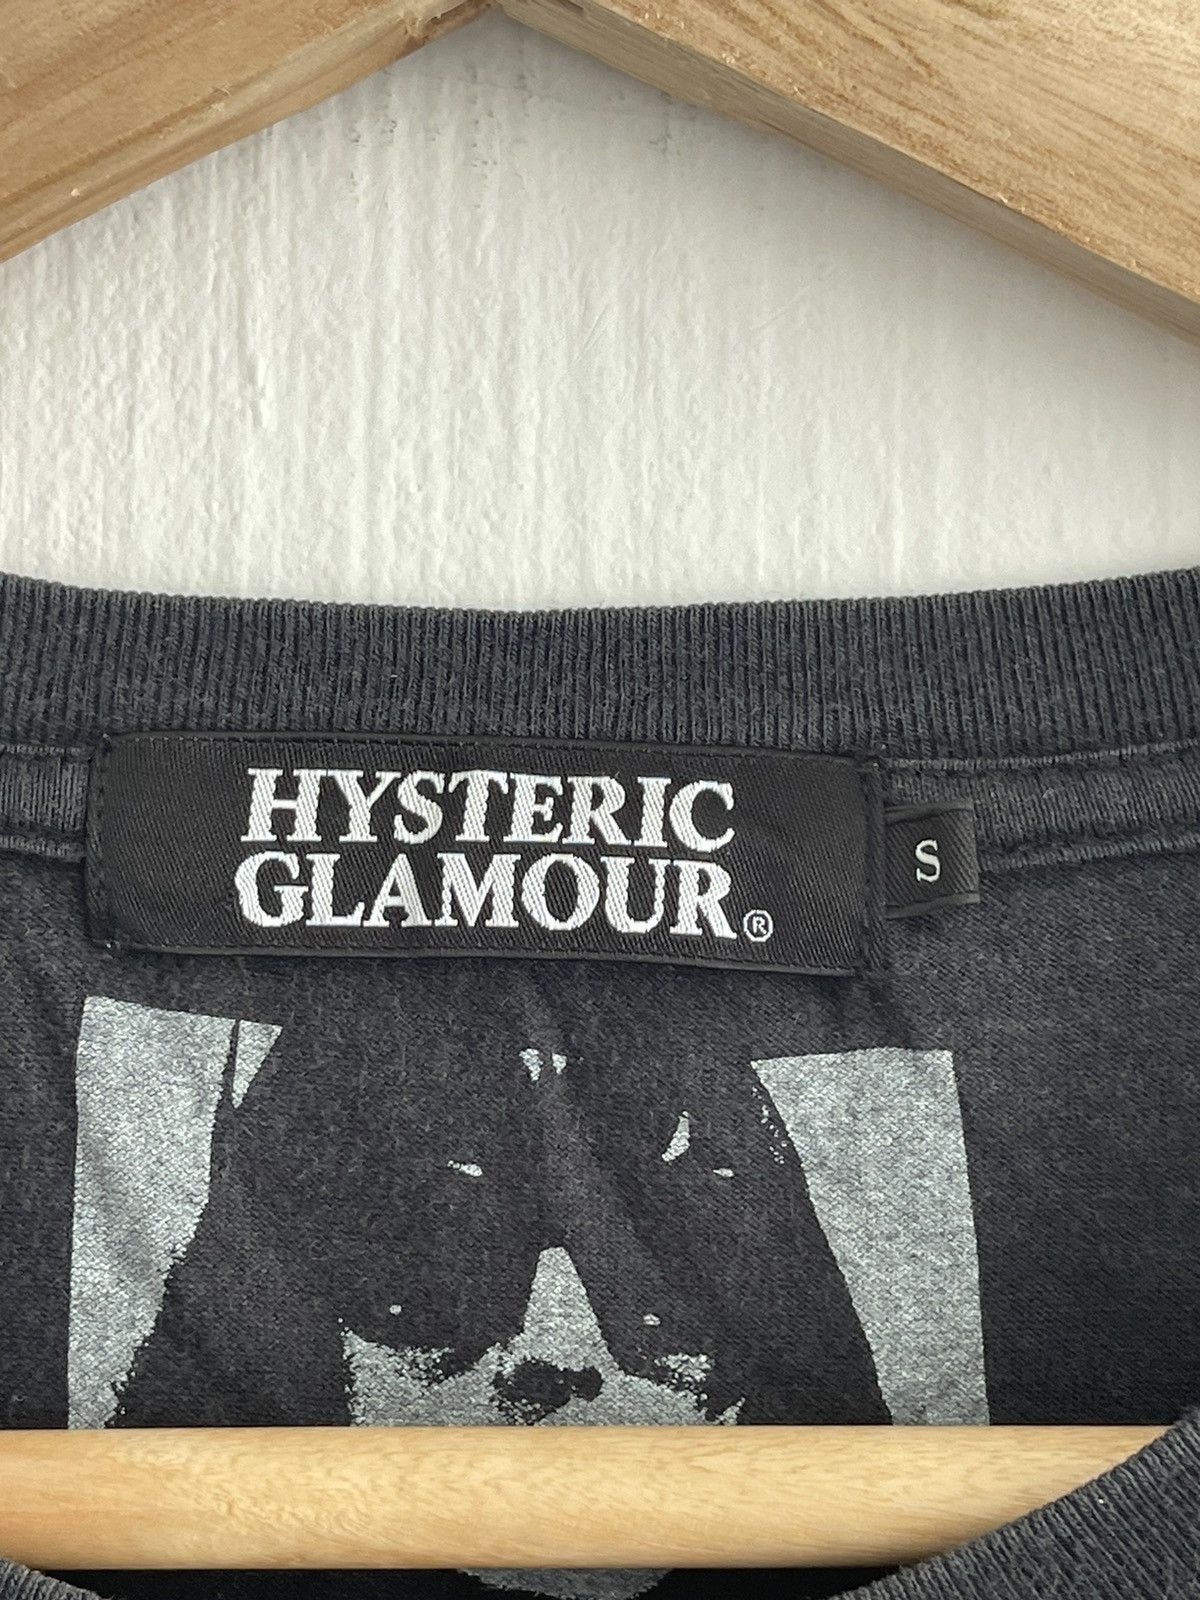 Vintage Hysteric Glamour Photo Tee By Roberta Bayley - 4